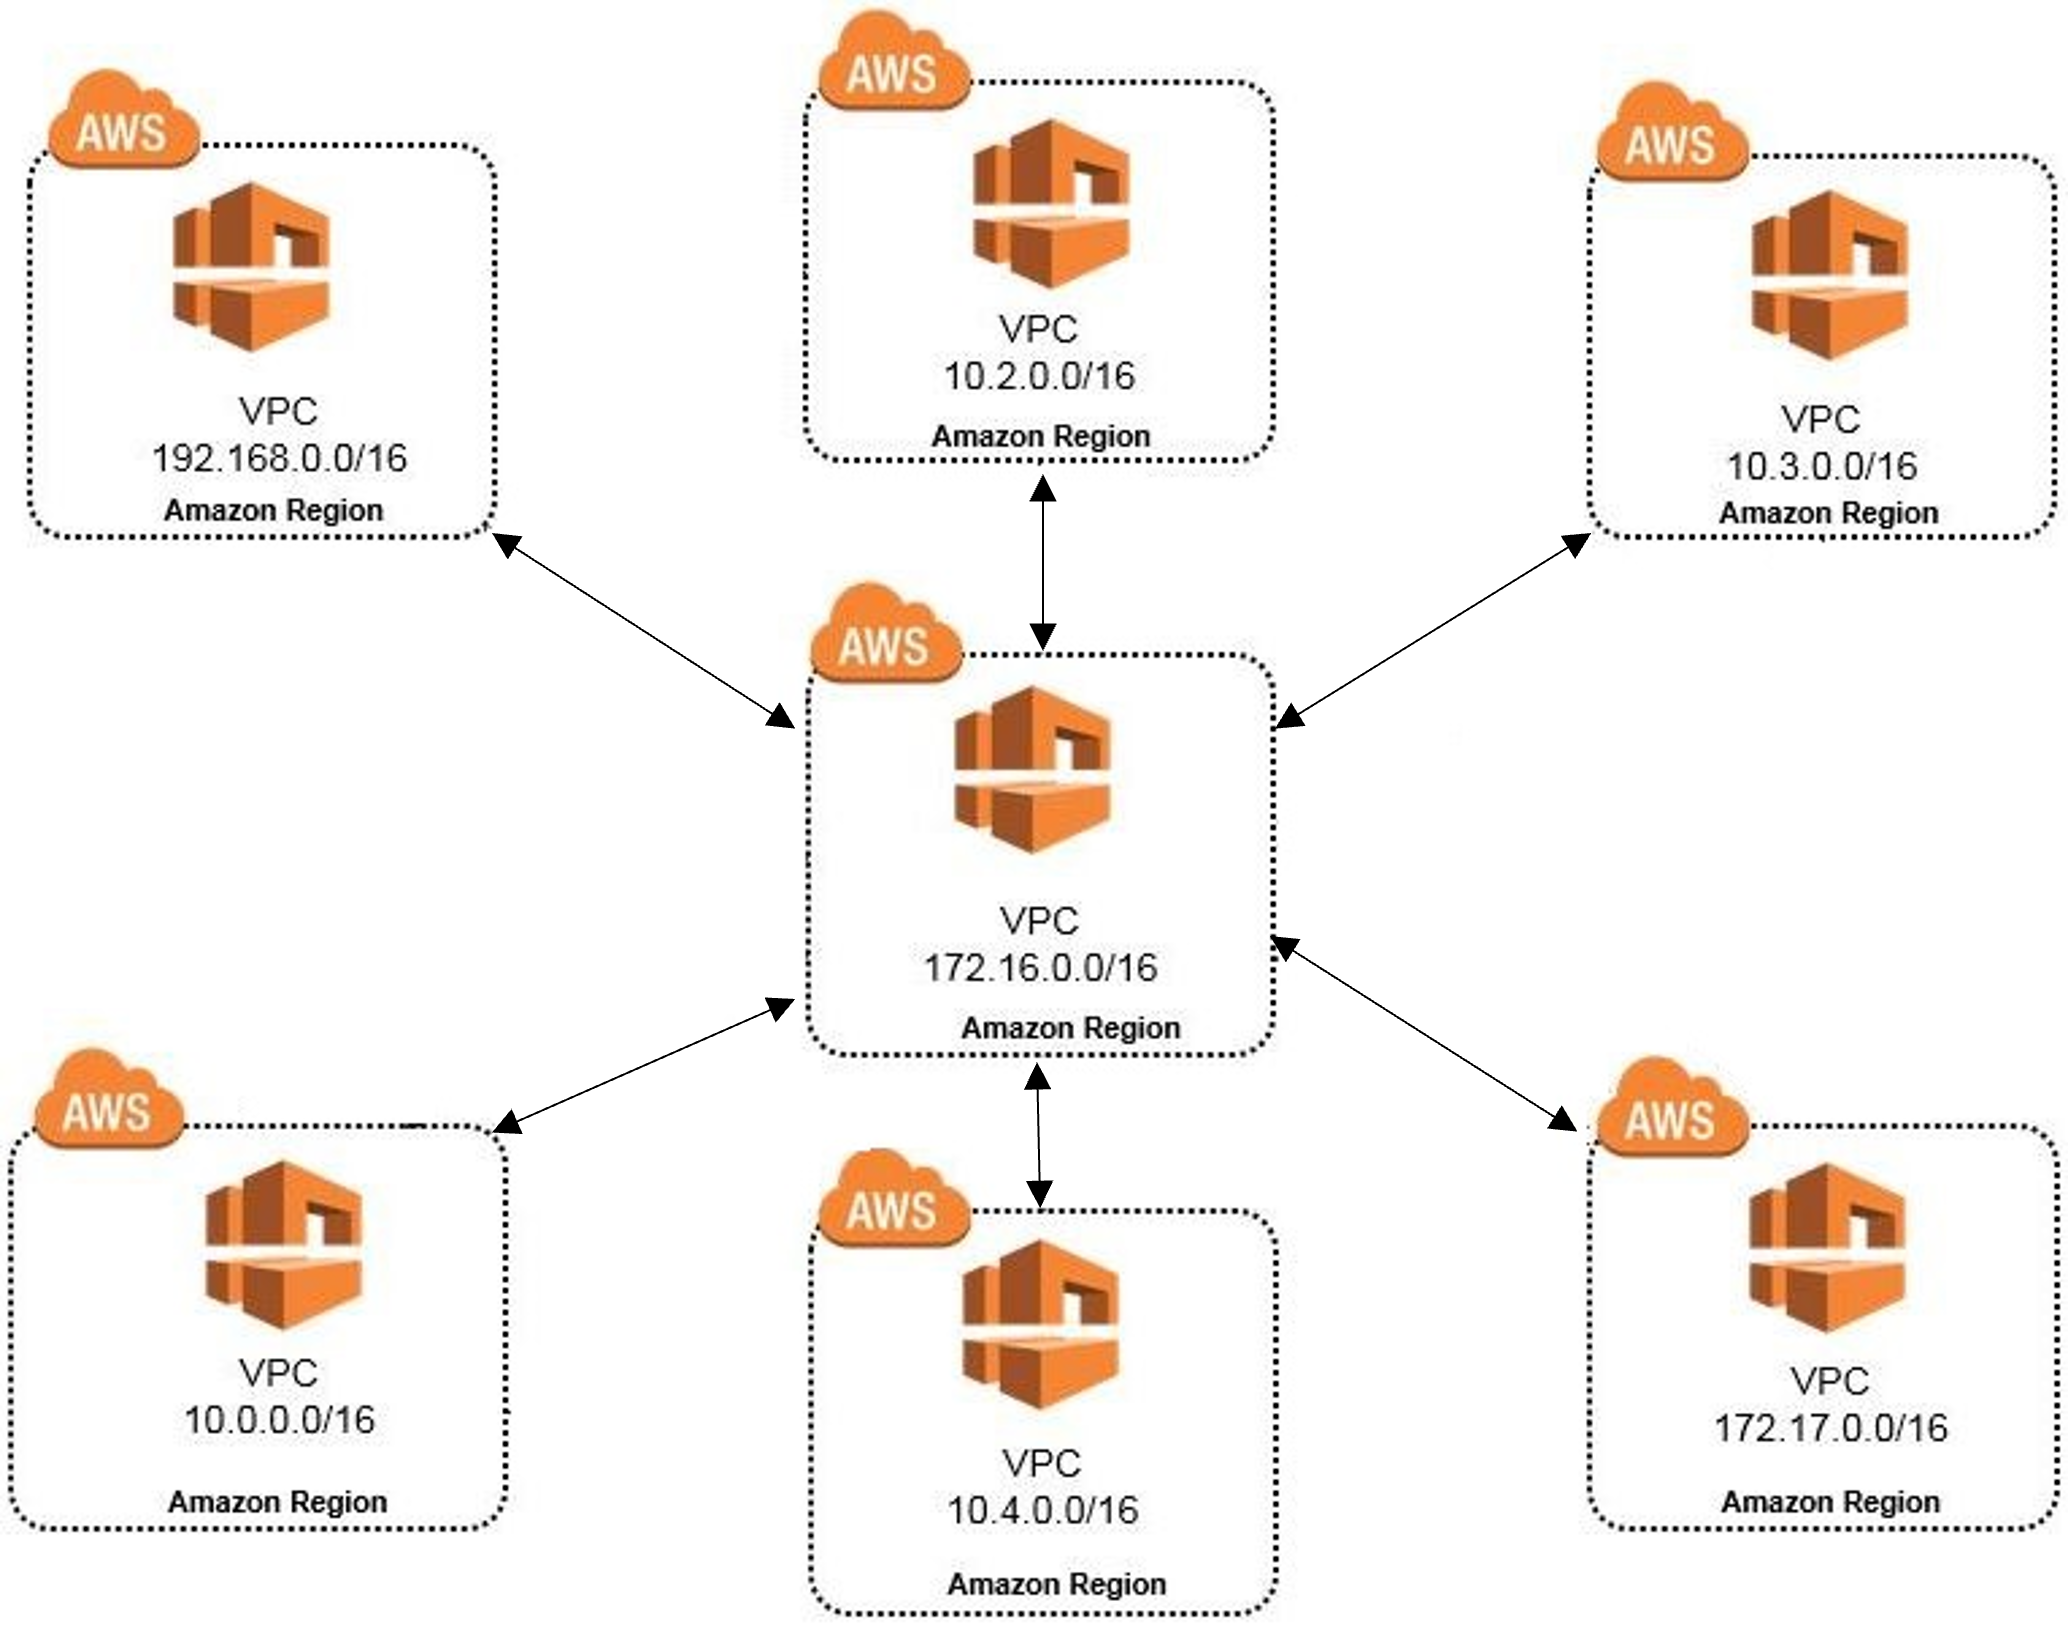 This is an image of the Hub and Spoke Network on AWS